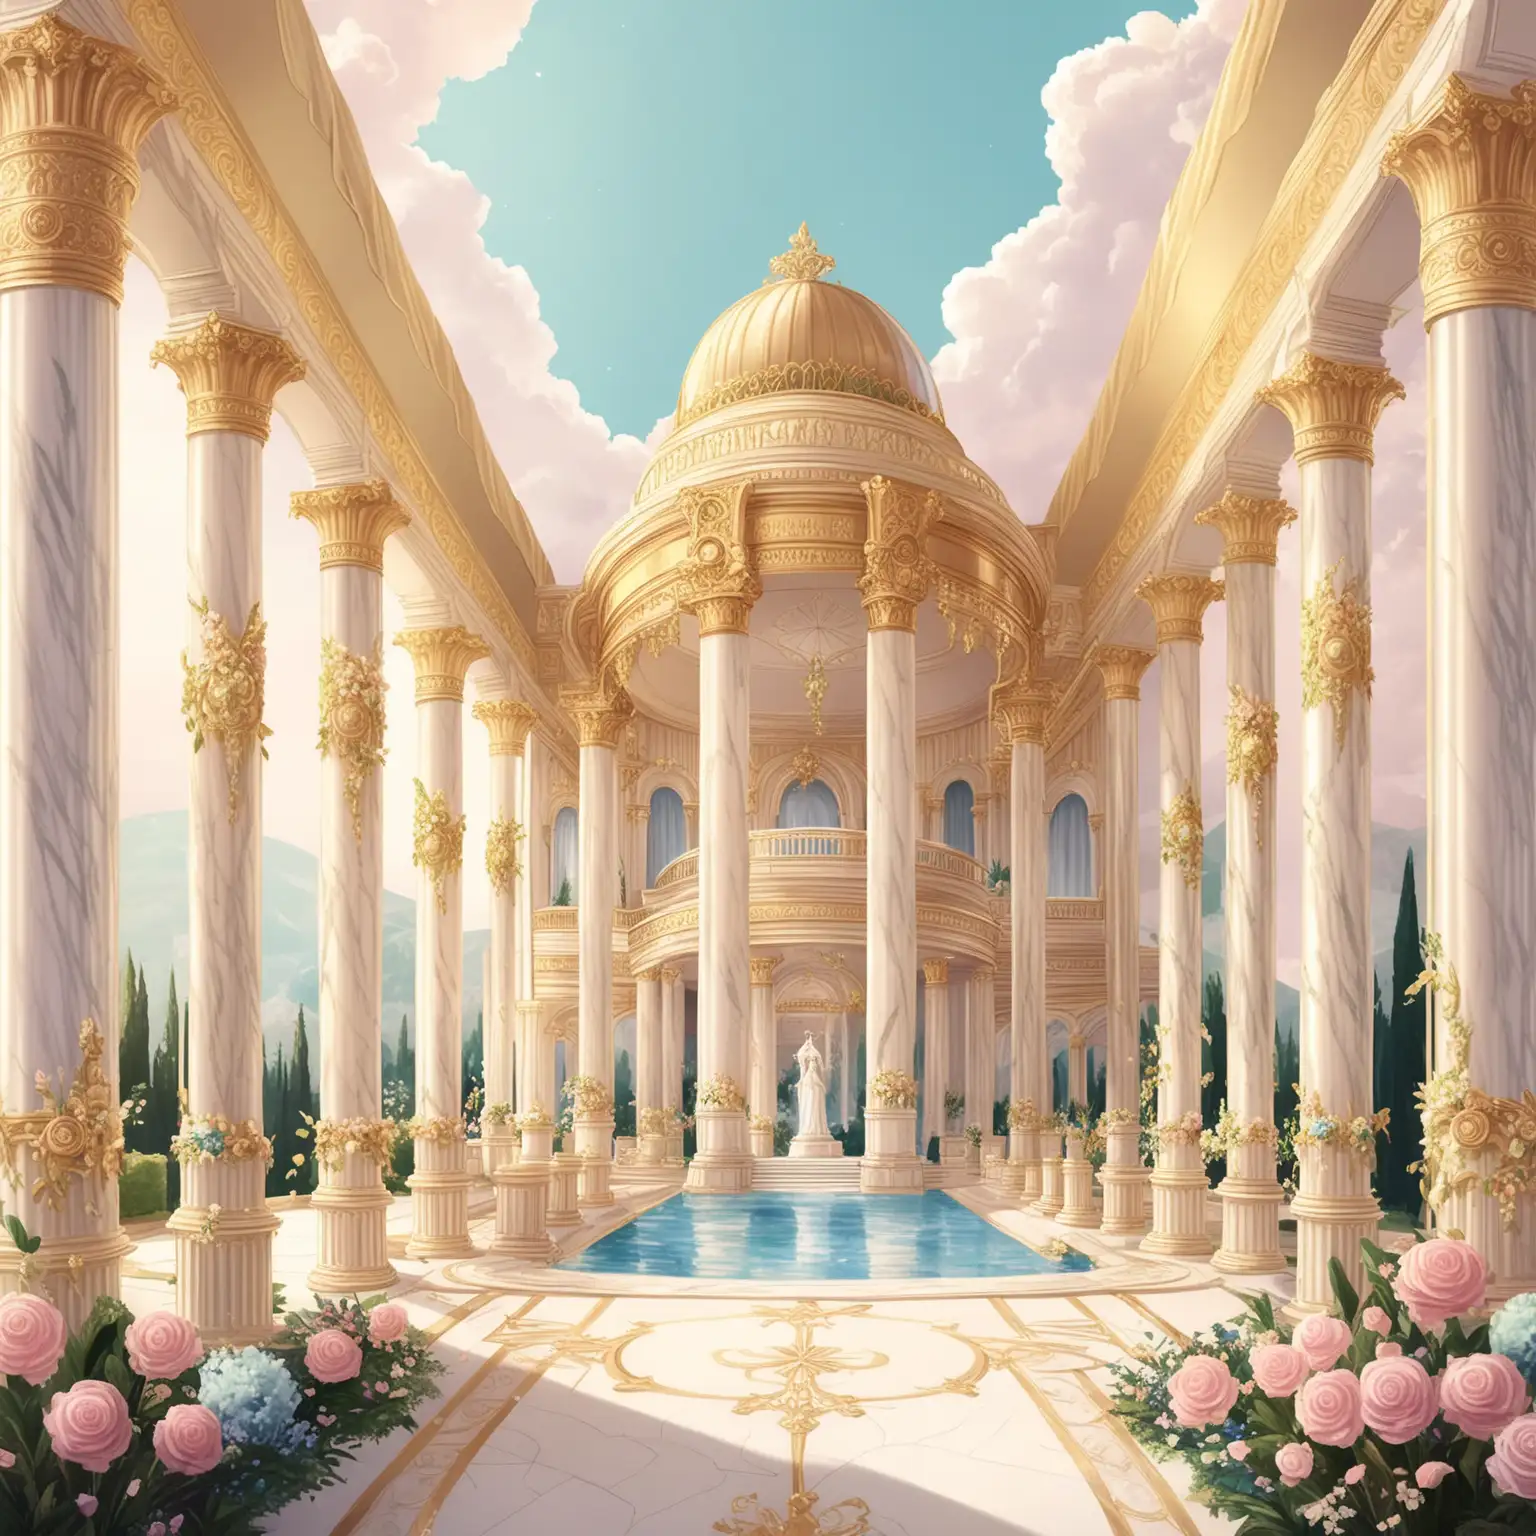 olympus palace, The grand and opulent palace where the wedding is to take place. It is adorned with marble columns, golden decorations, and beautiful gardens, in DND style, in pastel colors